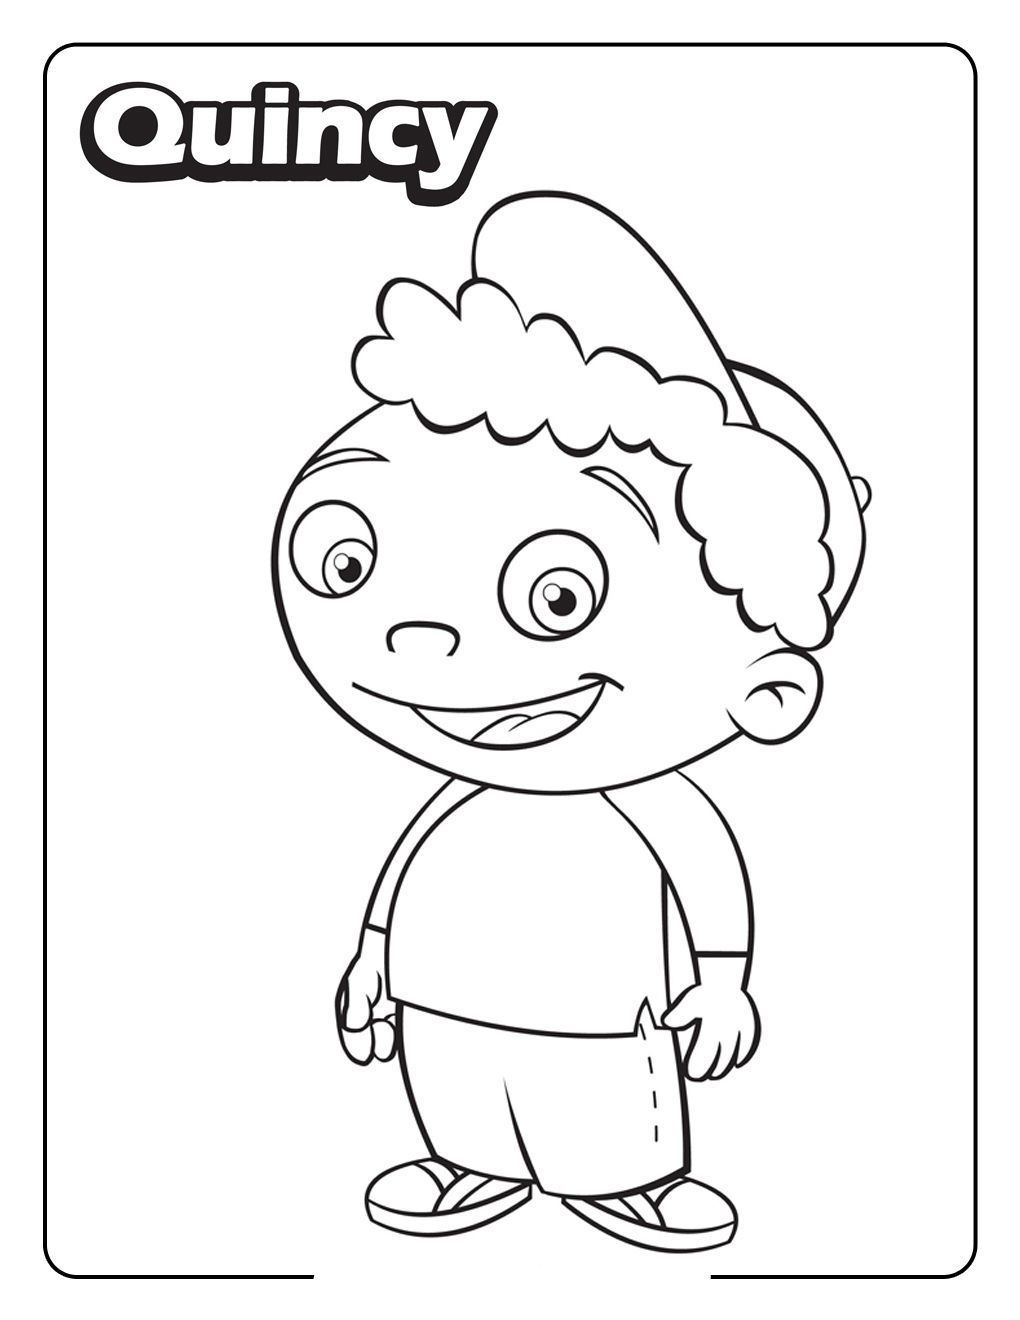 Related Little Einsteins Coloring Pages item-8276, Little ...